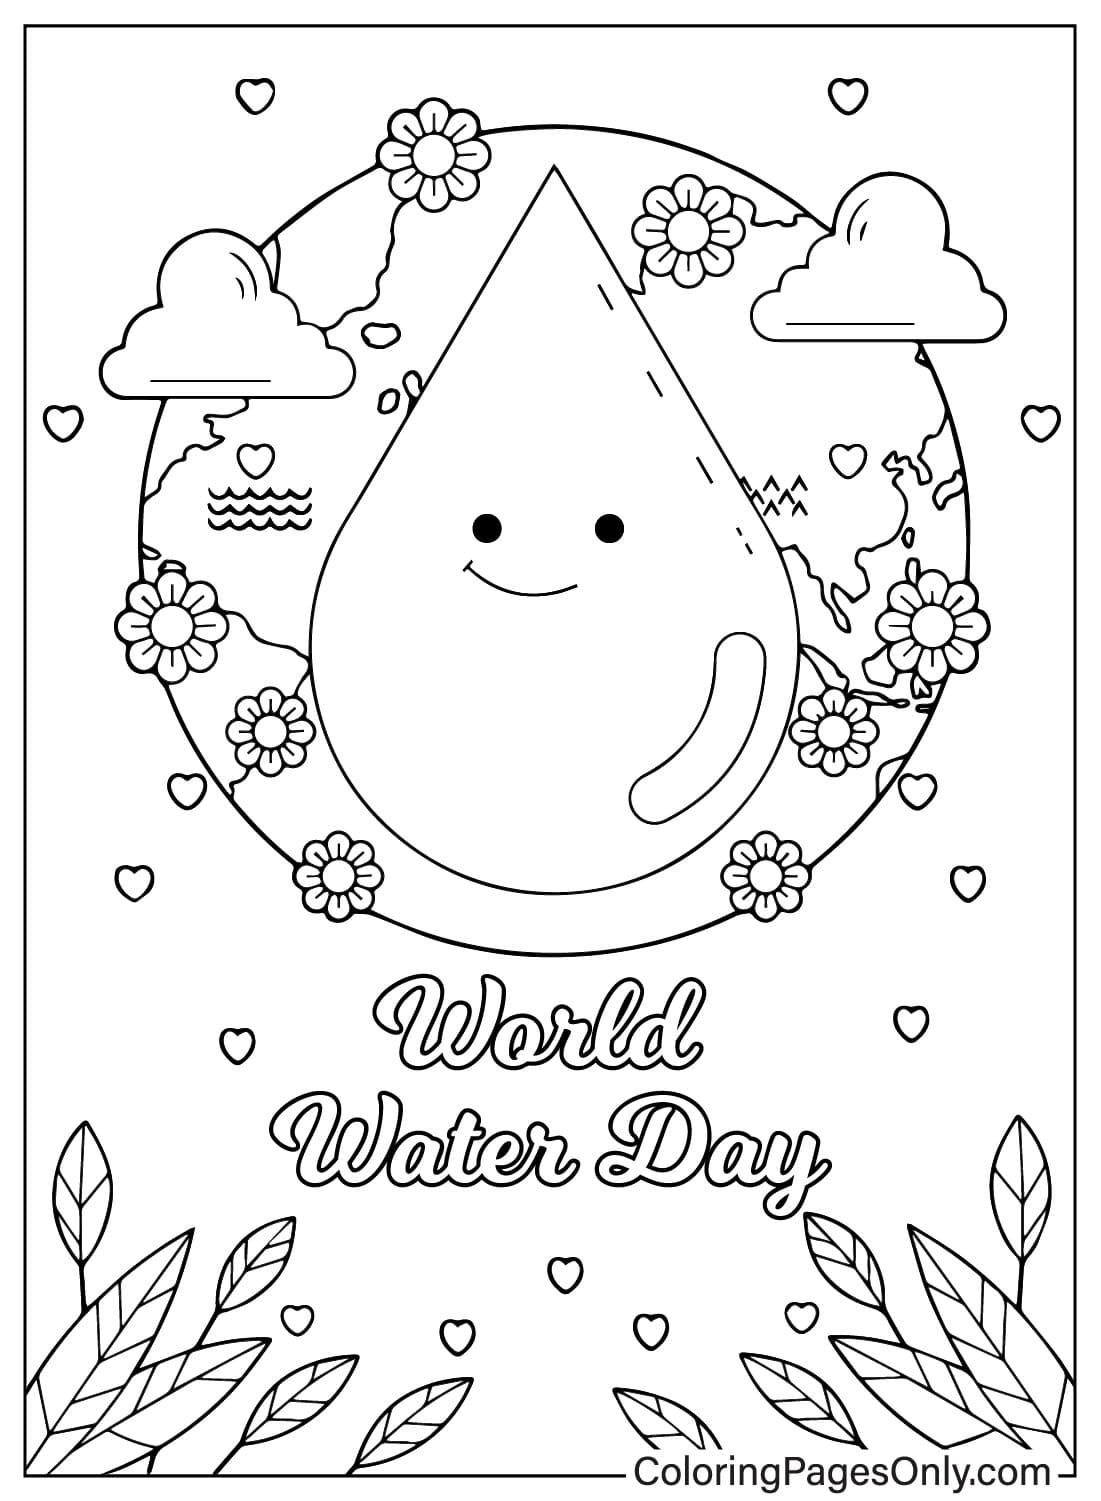 Happy World Water Day Coloring Page from World Water Day